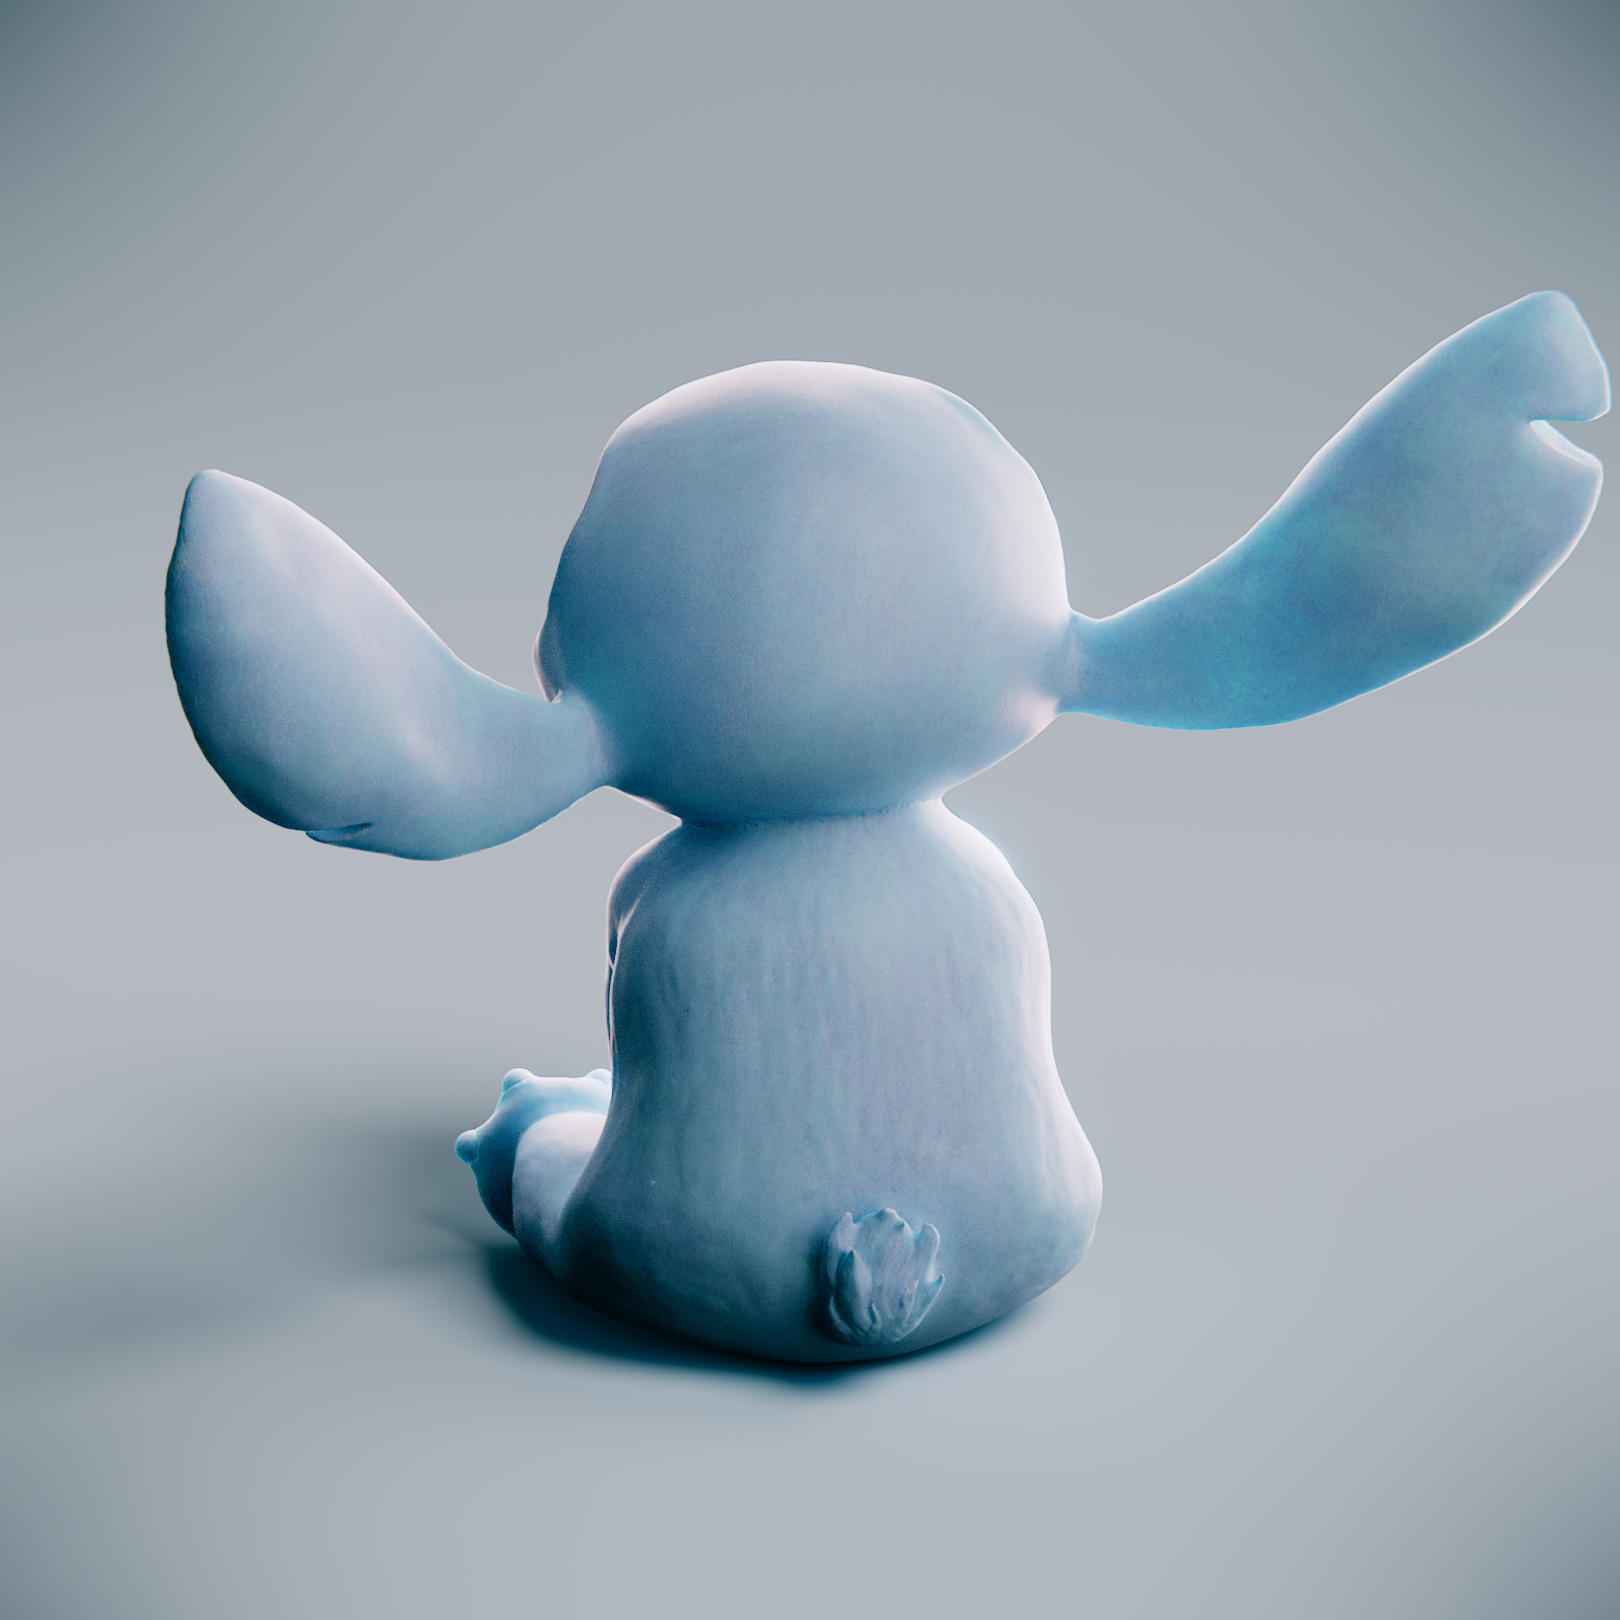 Stitch 3d Print Free Download Finished Projects Blender